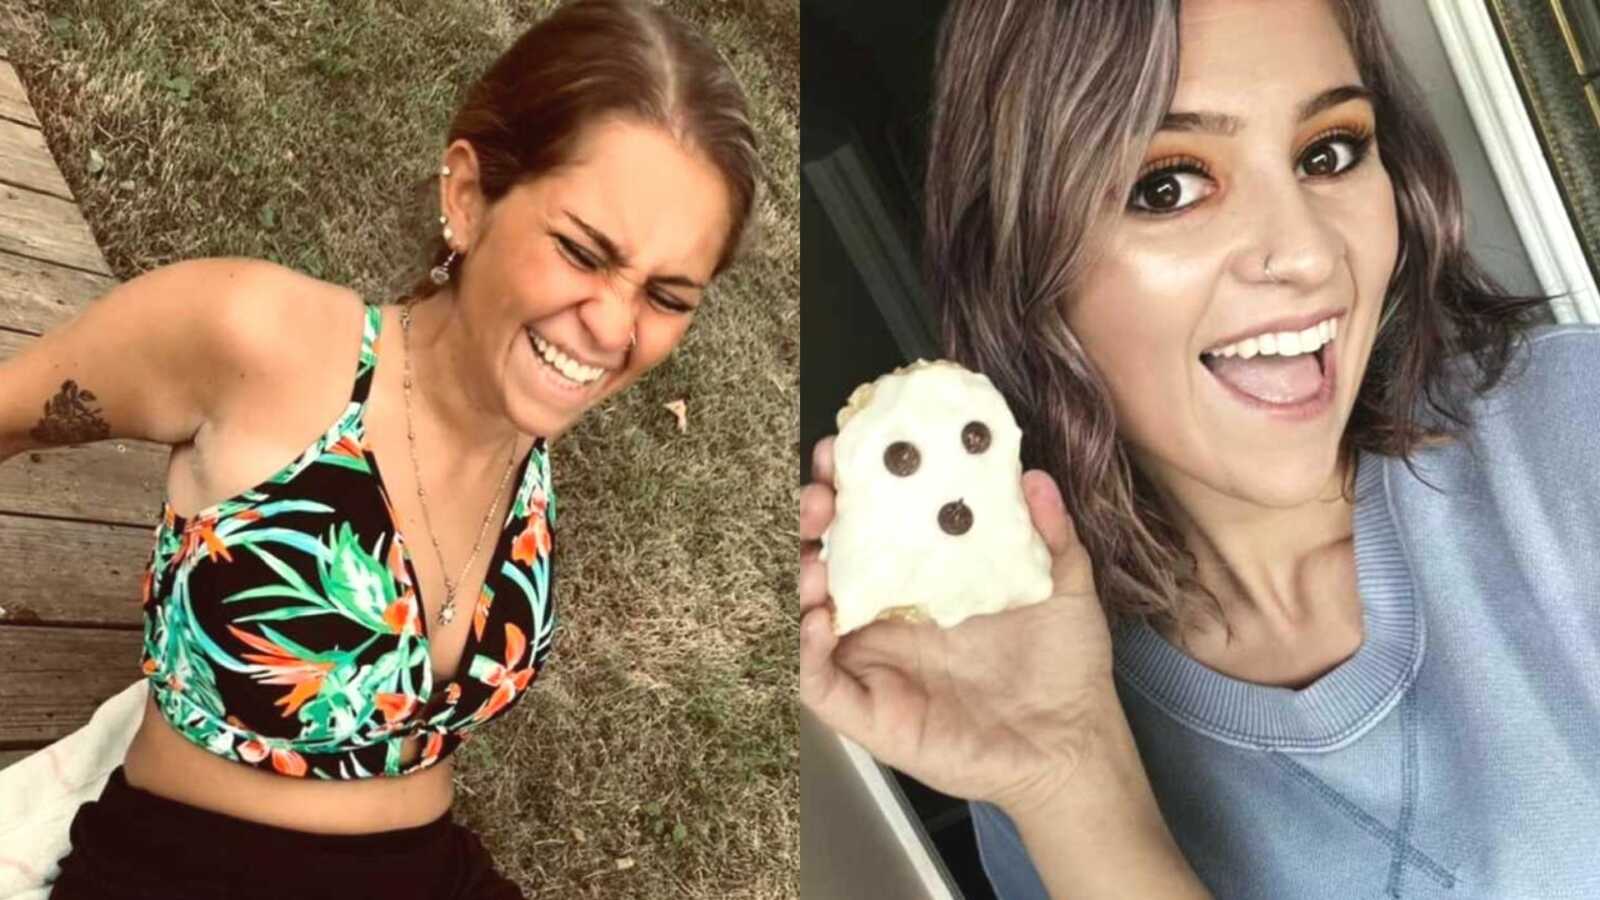 a woman in a bathing suit and a woman holding up a ghost cookie